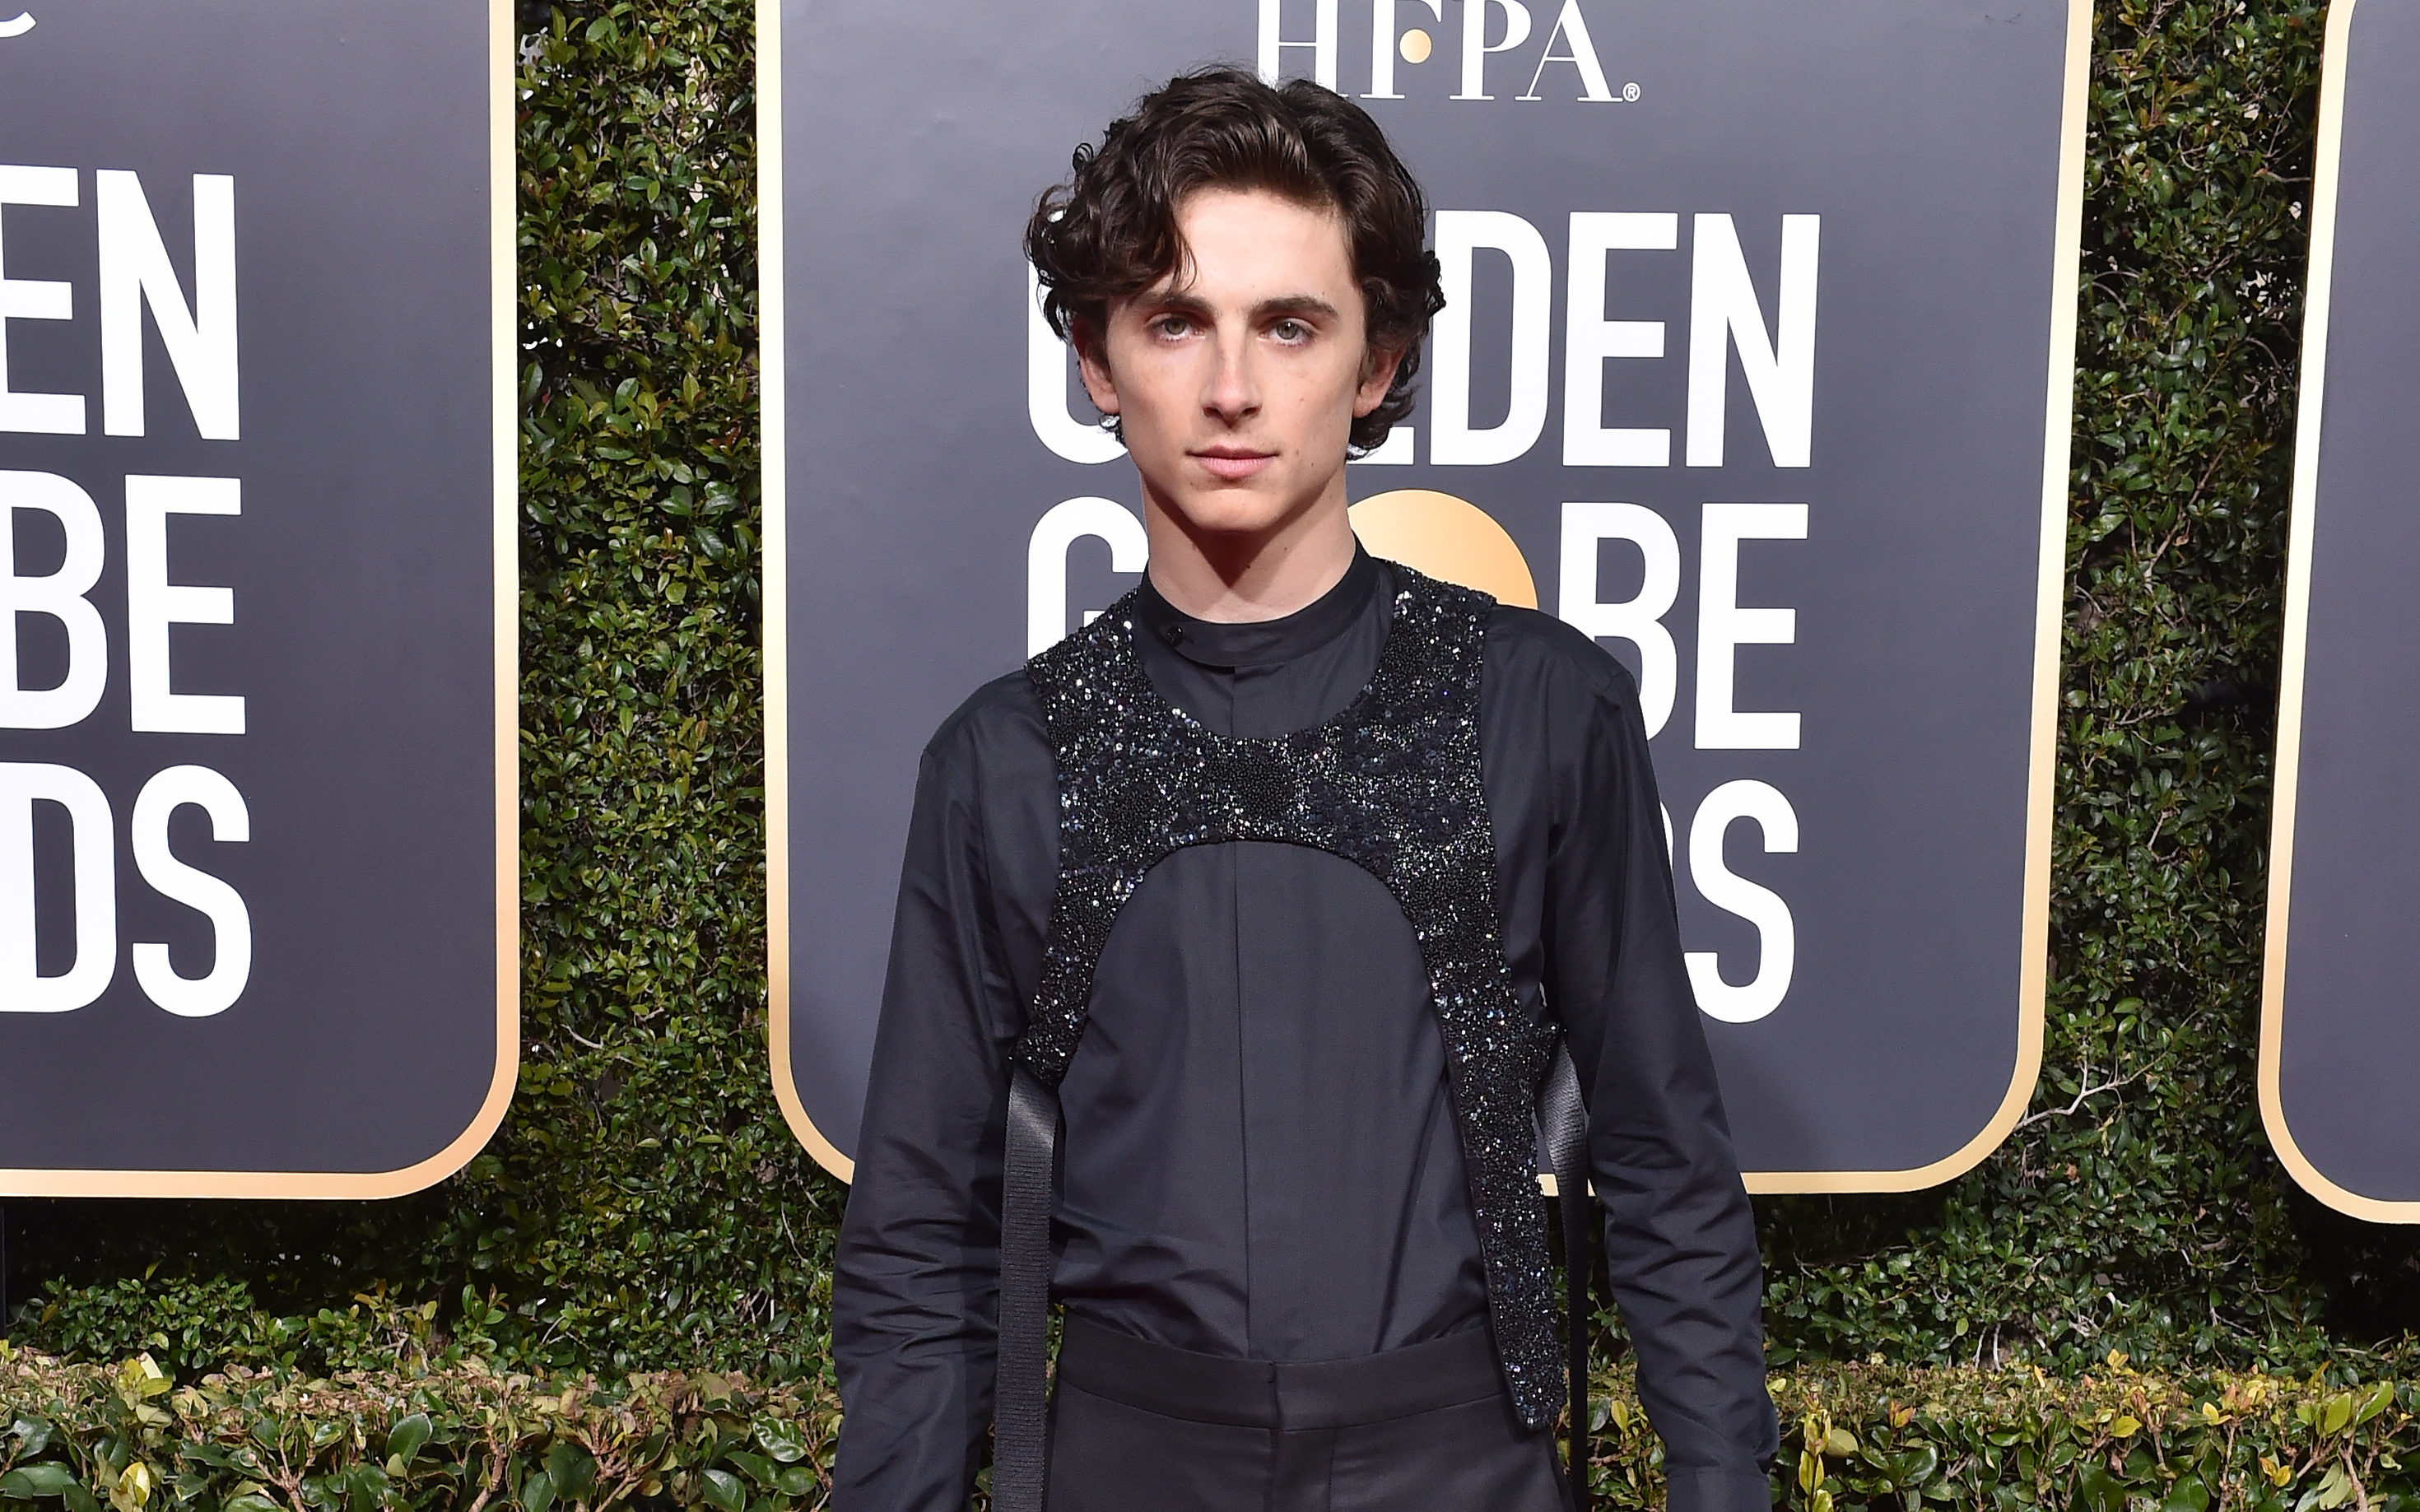 Harnesses as worn by Timothee Chalamet are 2019’s must-have fashion item in LA (Axelle/Bauer-Griffin/FilmMagic)